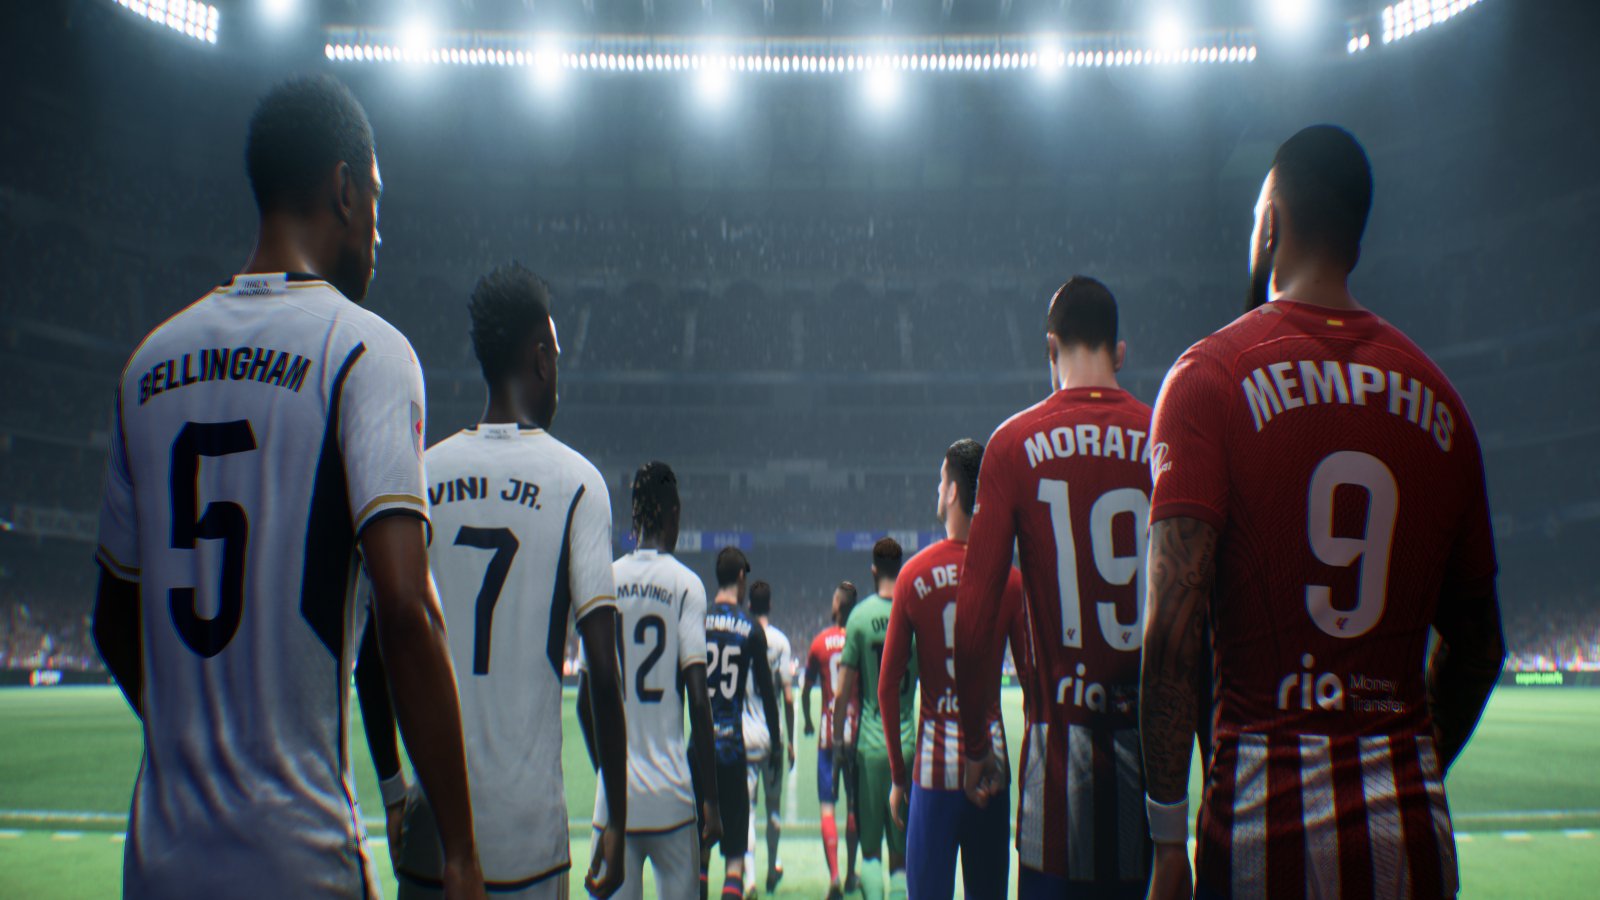 REVIEW: FIFA 18 Has 4 Great Changes, and 4 Things That Still